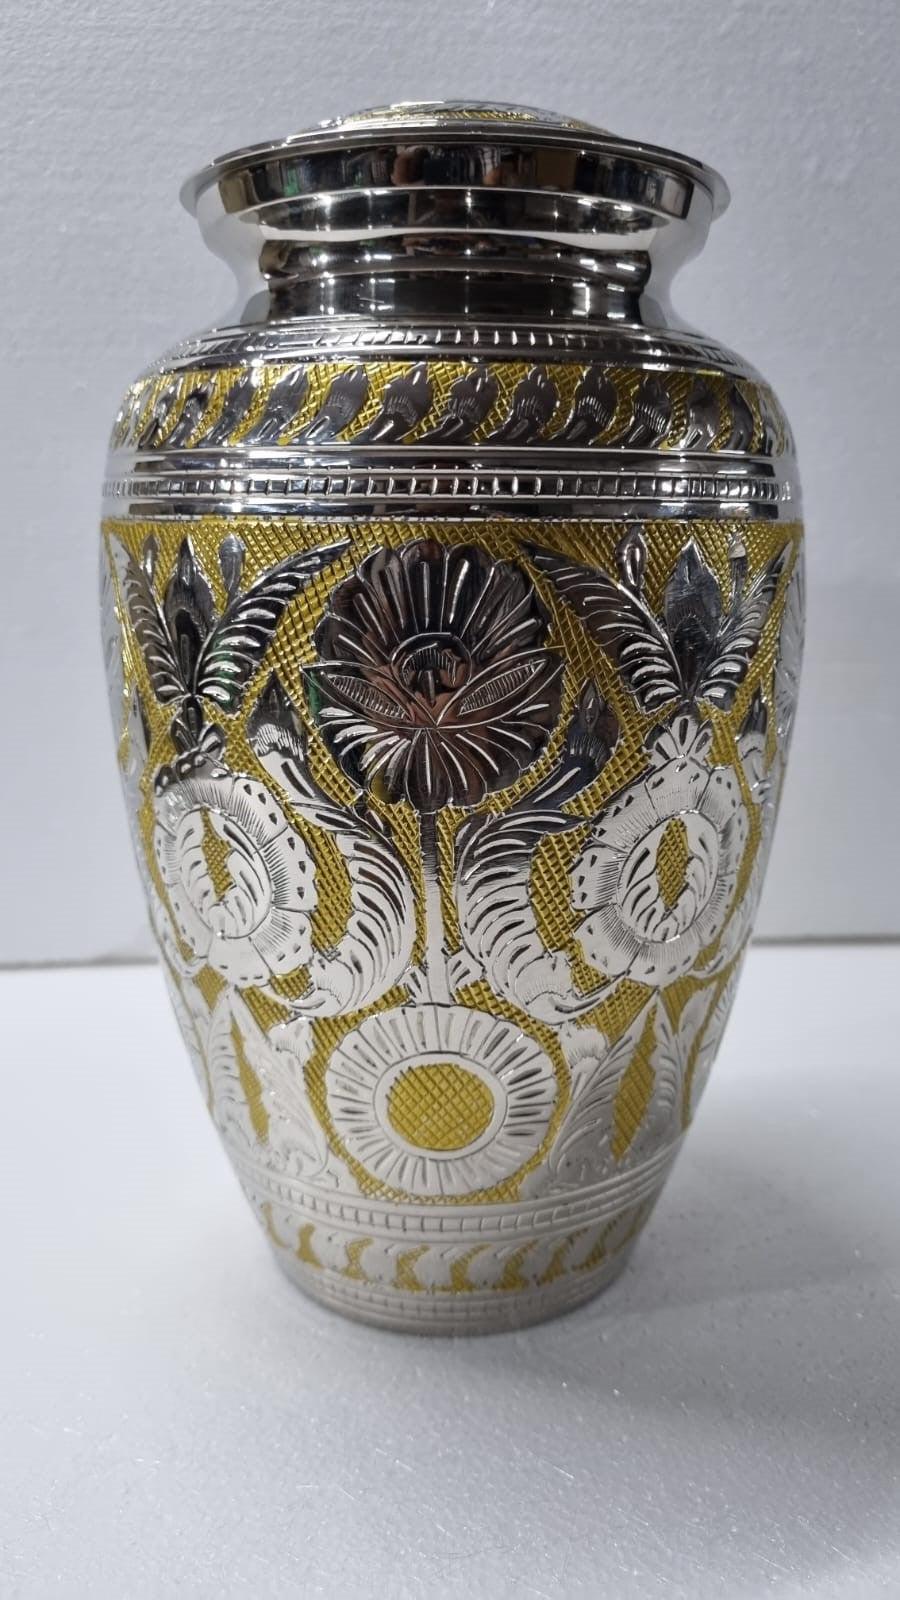 Hacana Adult Ashes Urn-Adult Urn for Ashes-Cremation Urns- The cremation urns for ashes and keepsakes for ashes come in a variety of styles to suit most tastes, decor and different volumes of funeral ashes.